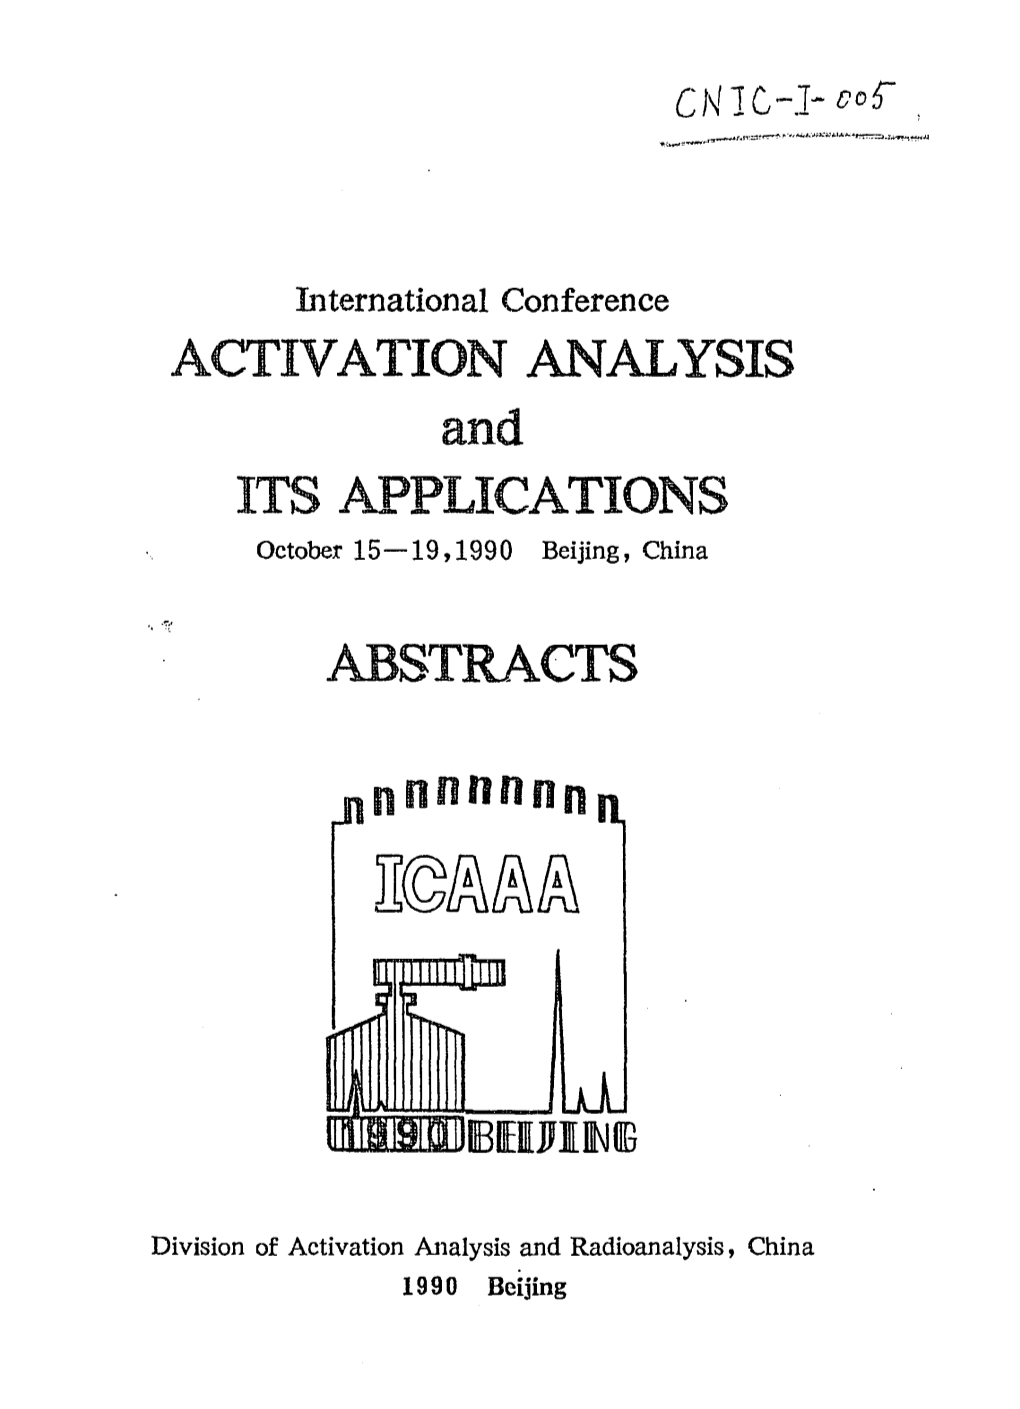 Activation Analysis Abstracts